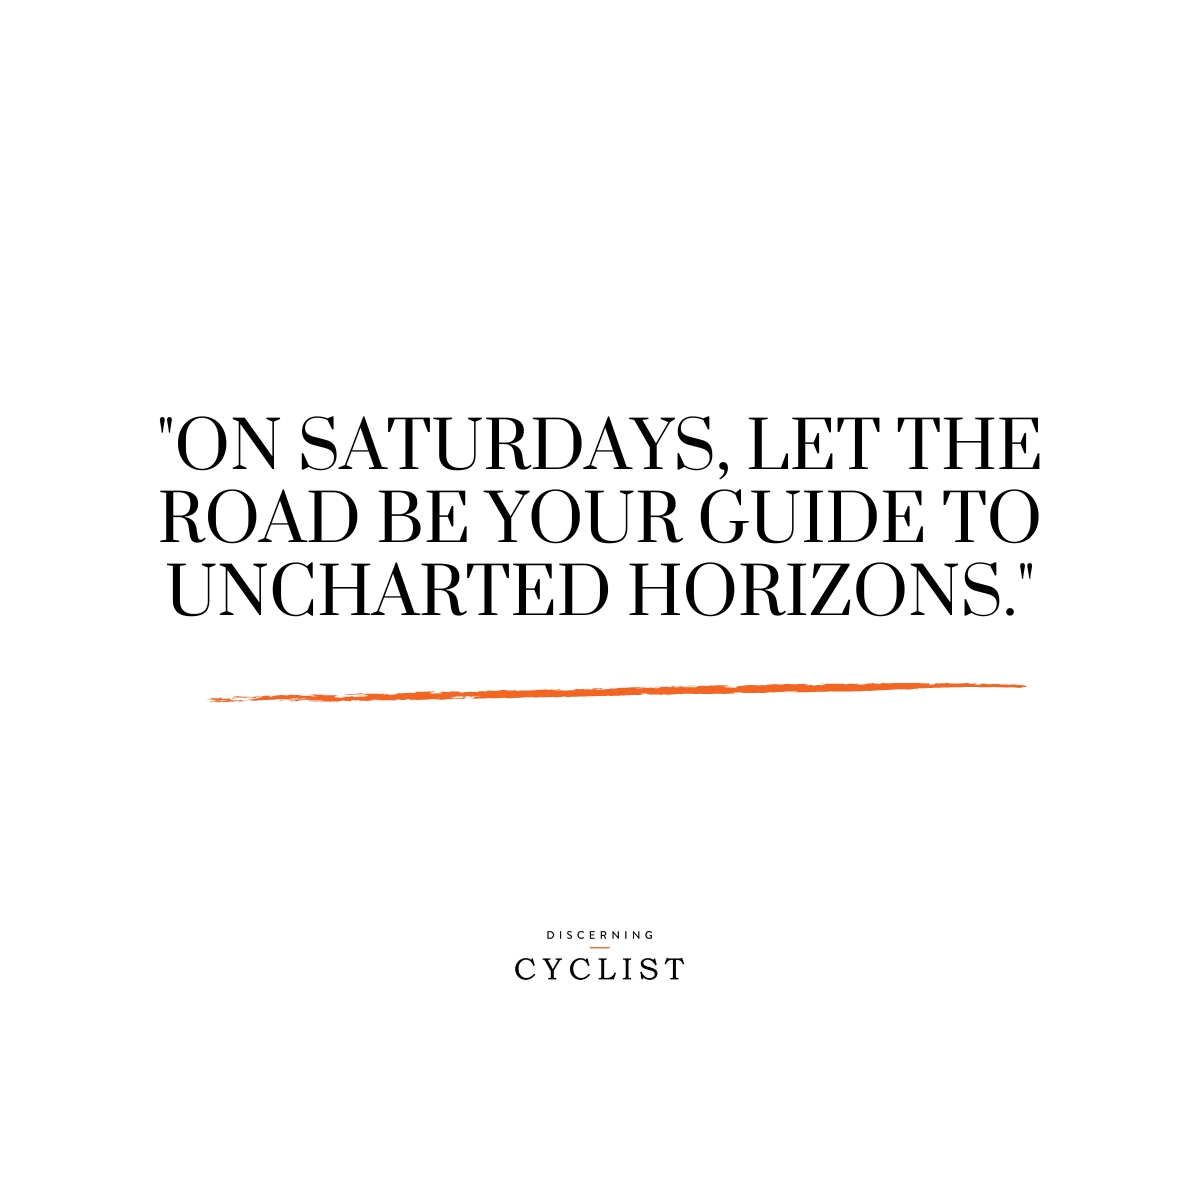 "On Saturdays, let the road be your guide to uncharted horizons."